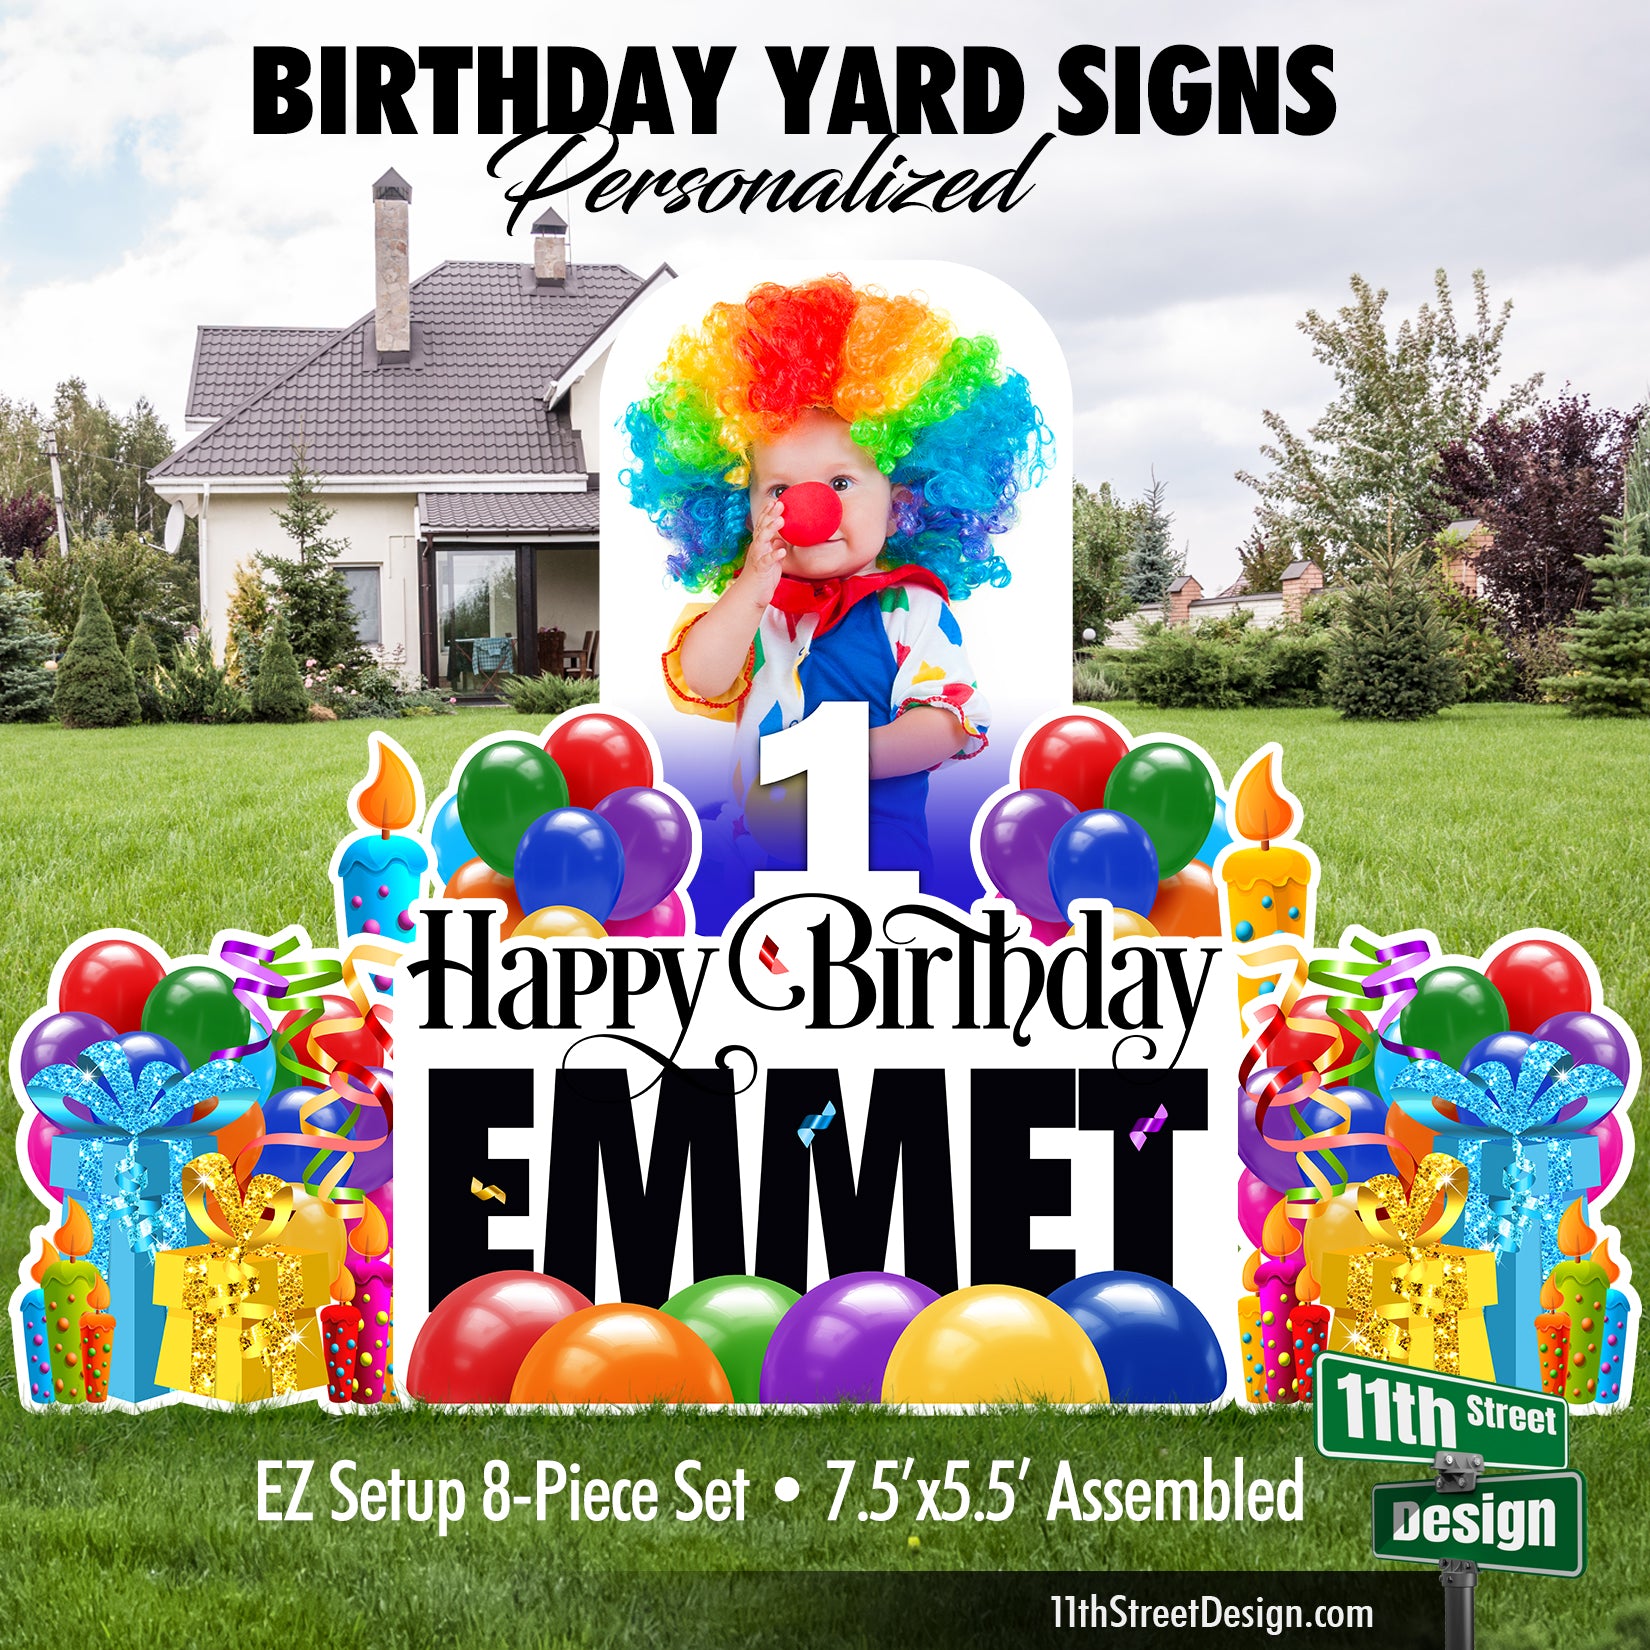 Personalized Happy Birthday Yard Signs with Photo